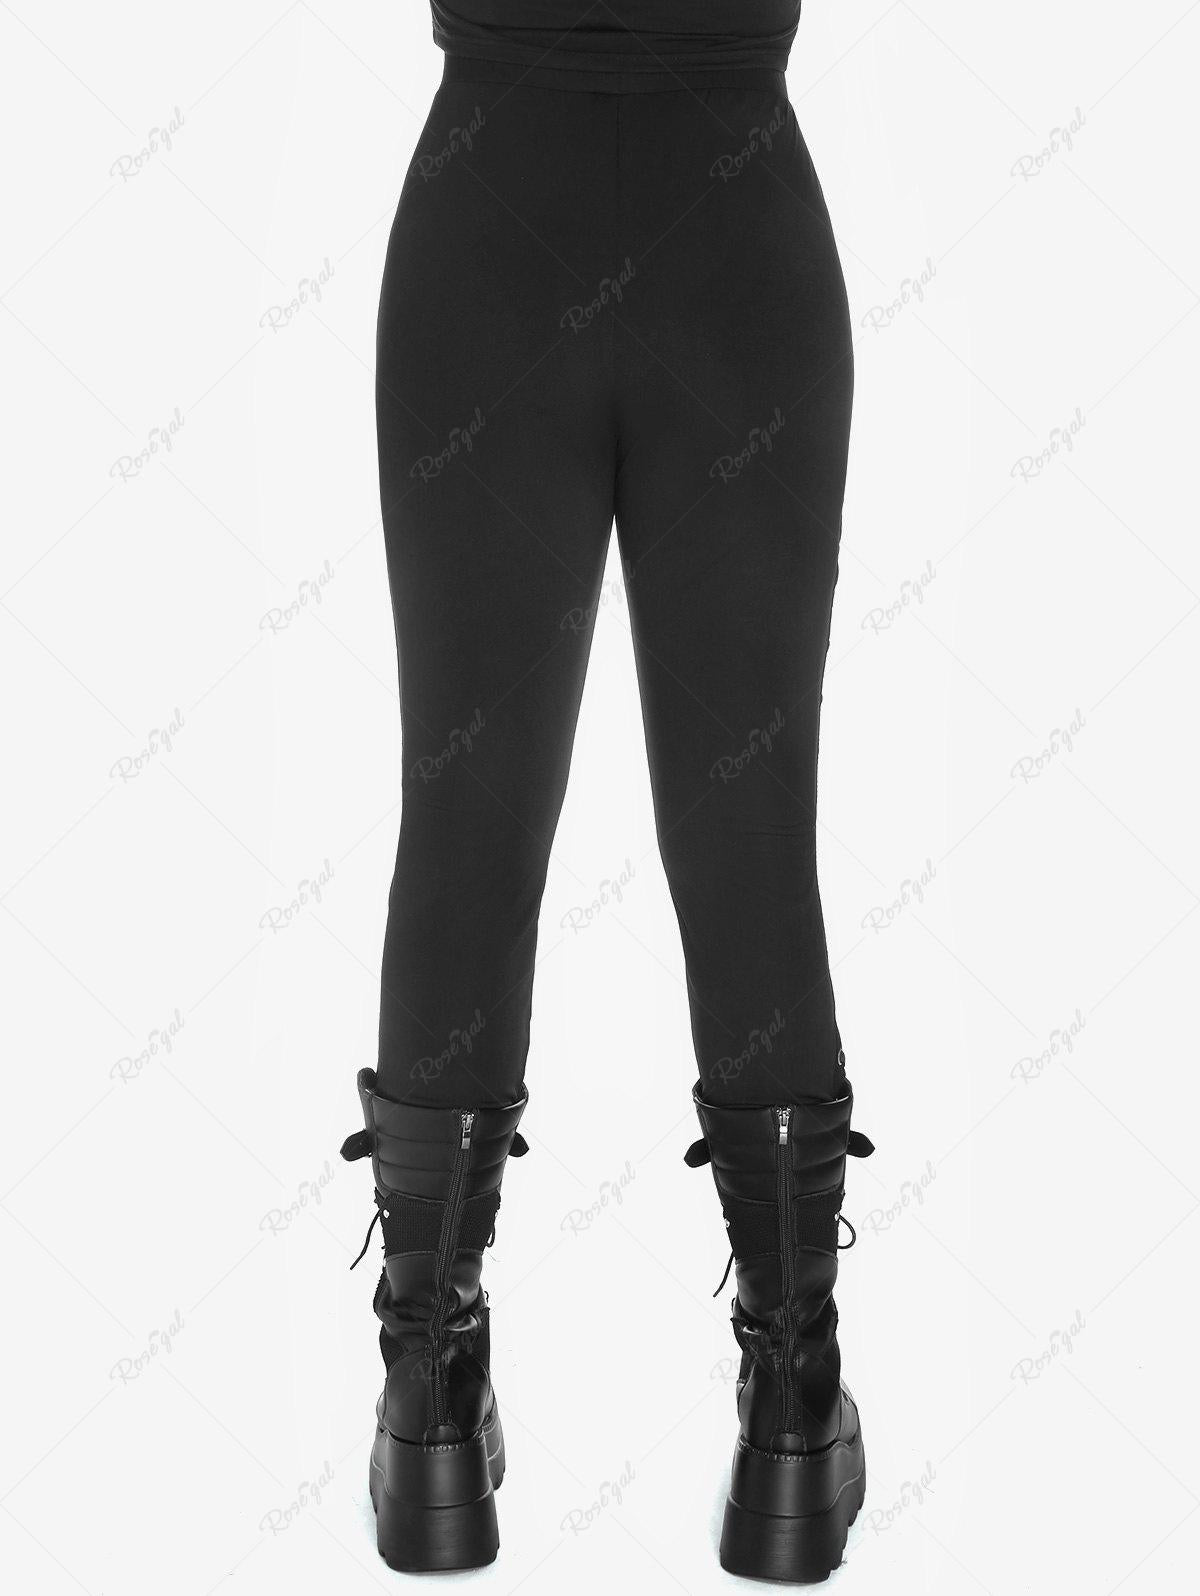 💗Avtvmnvvitch Loves💗 Gothic Lace Panel Lace-up Skinny Pull On Pants